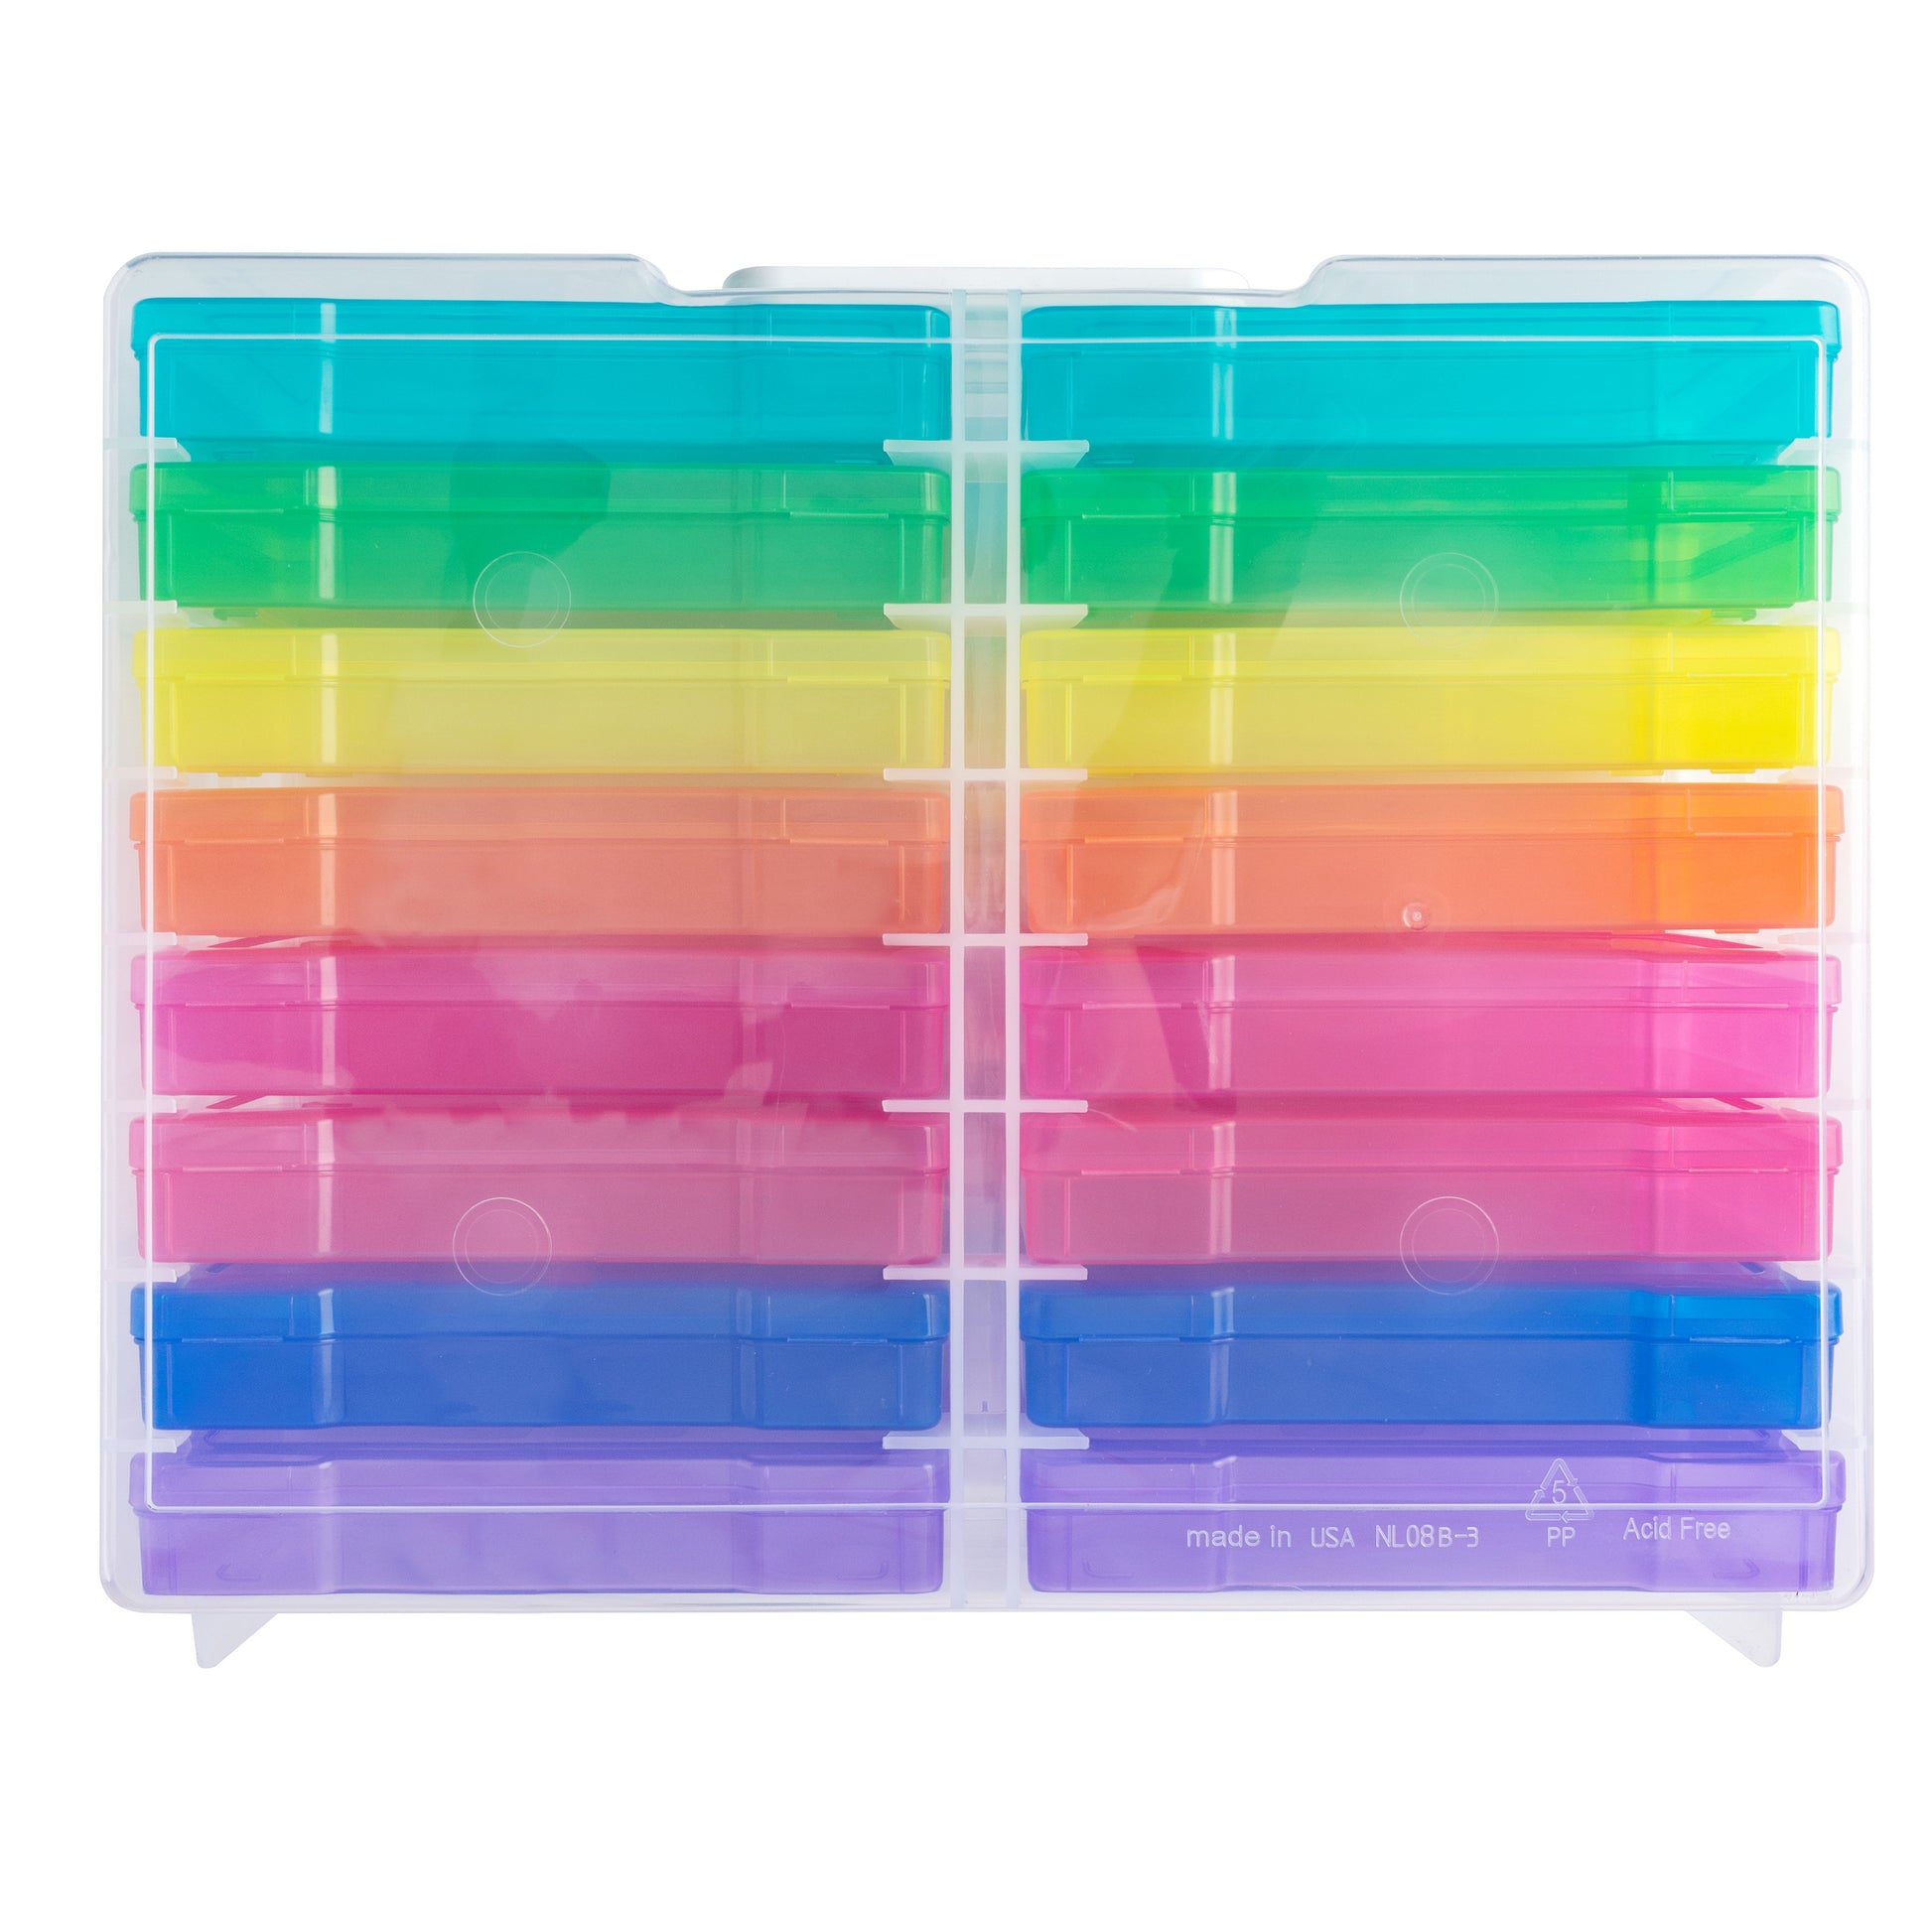 We R Memory Keepers® 3-Tier Snap Box Translucent Plastic Storage Case